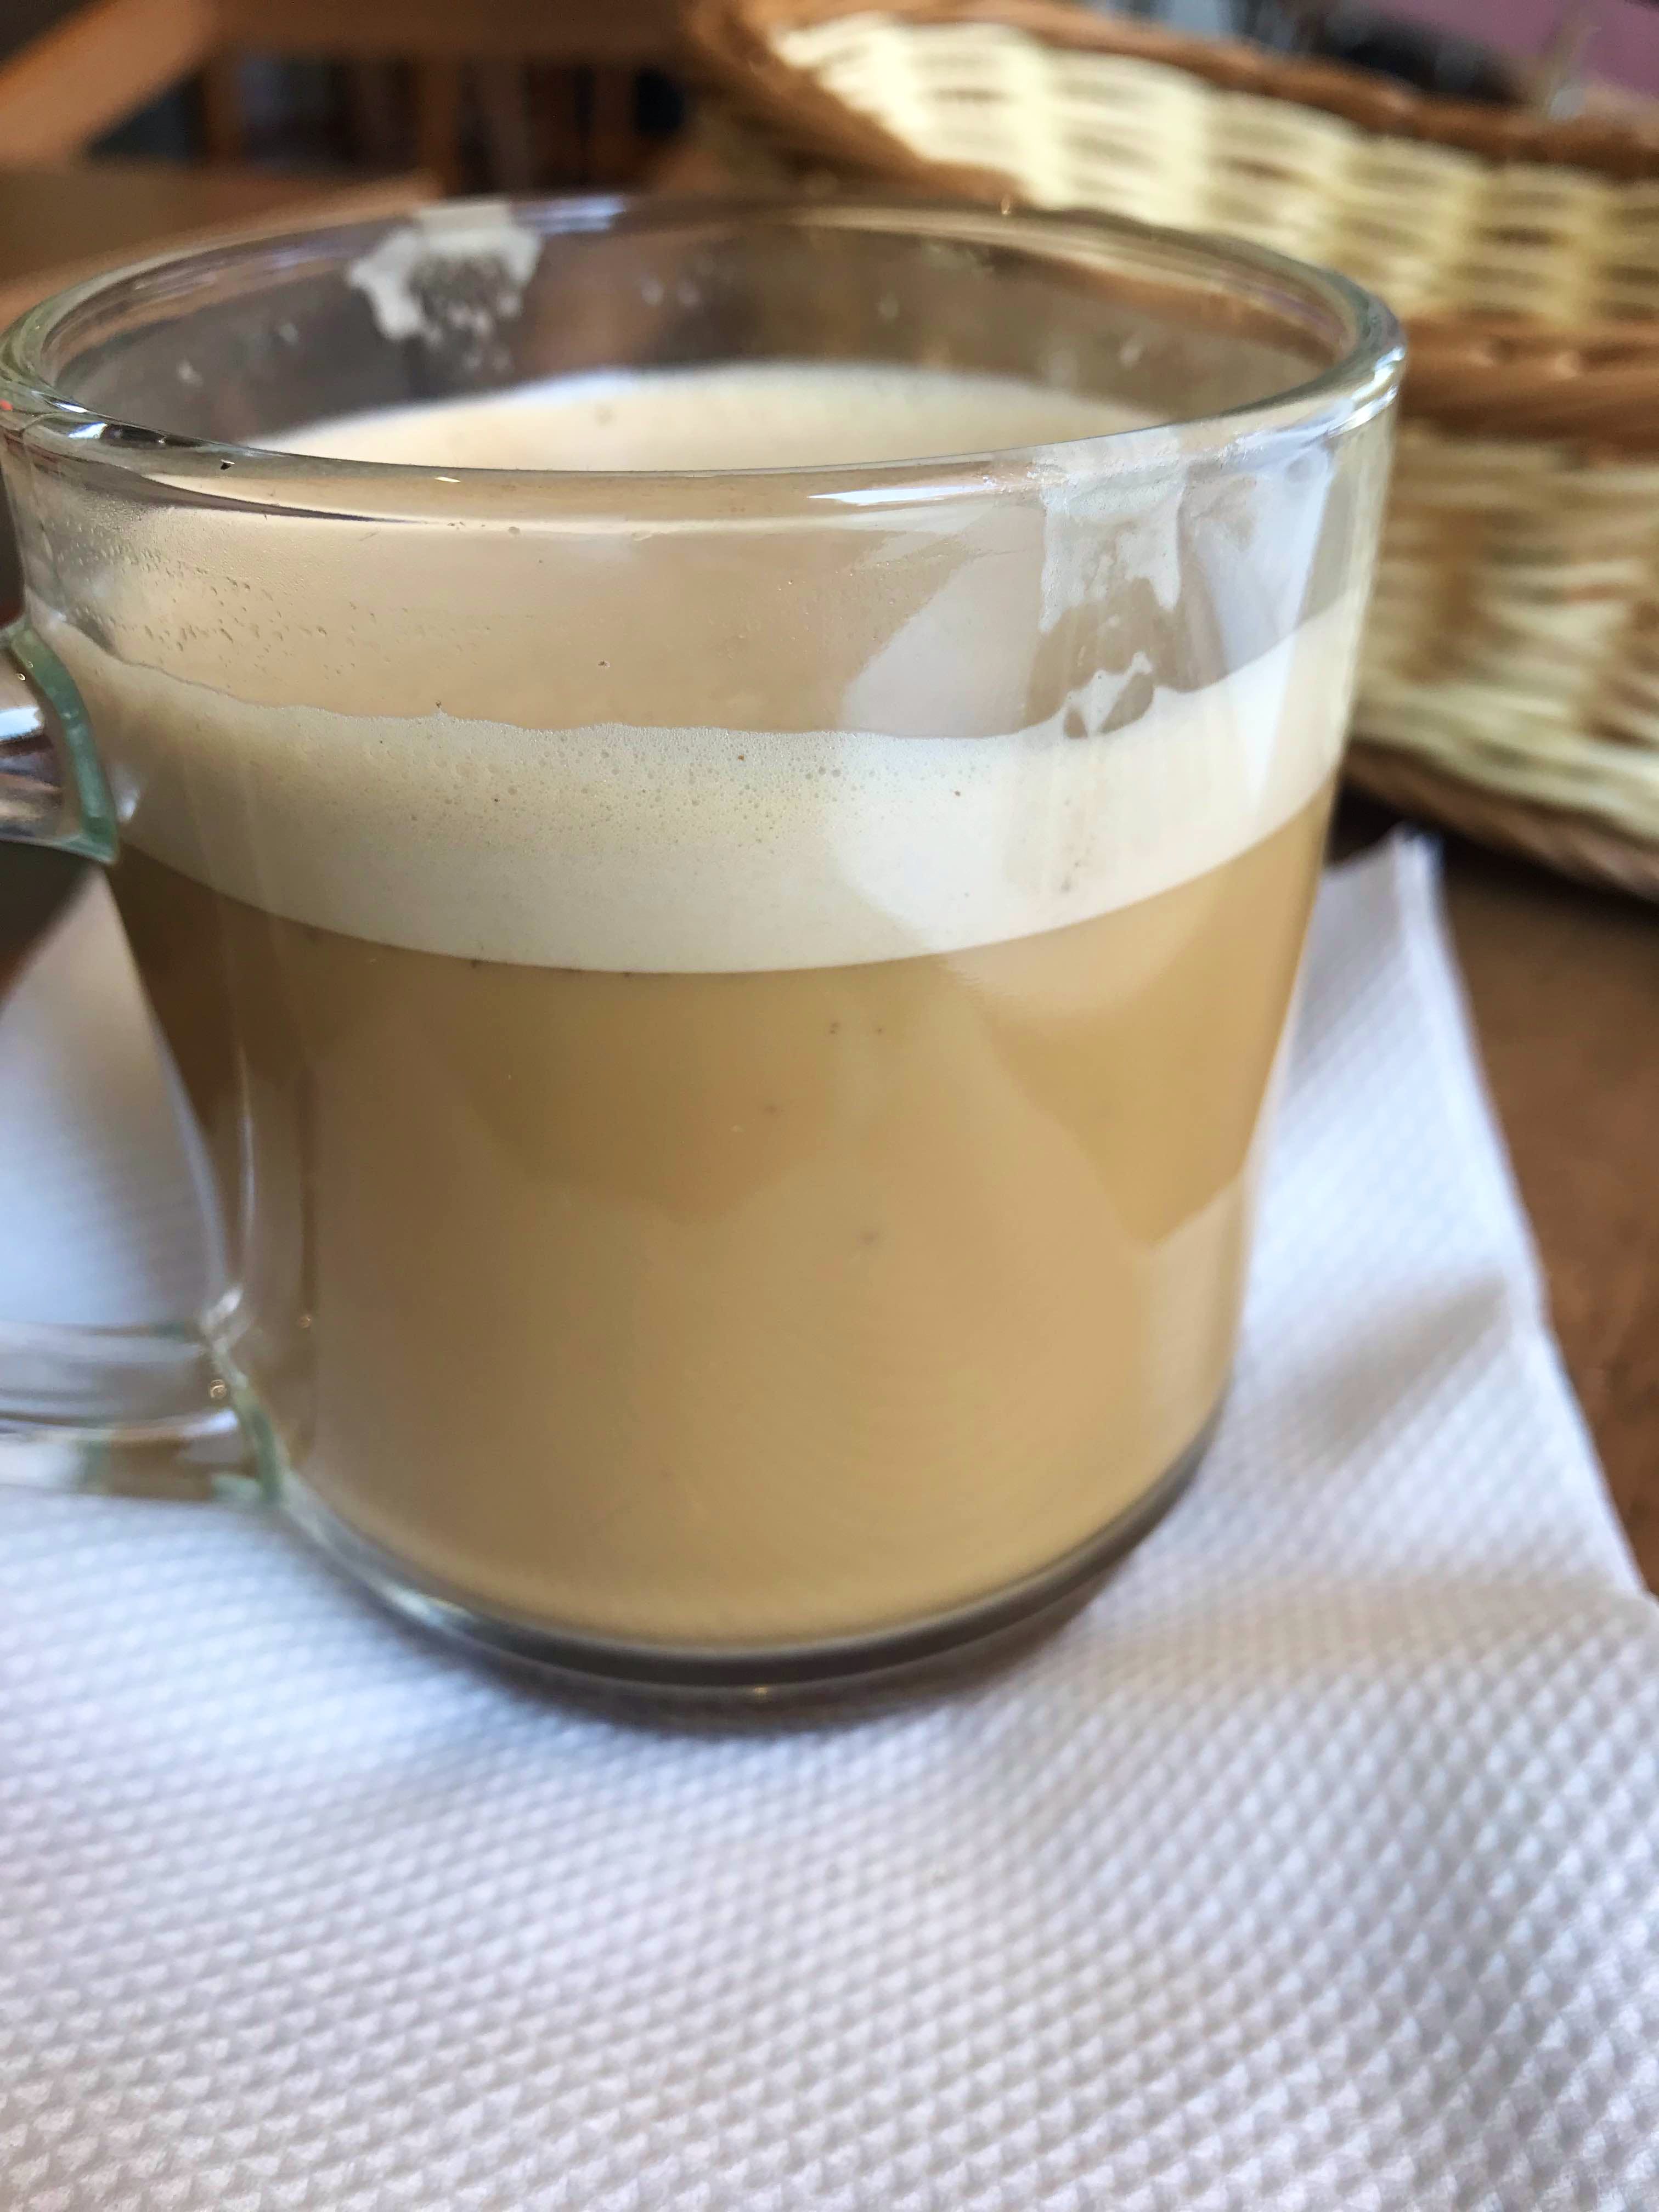 This cafe in Whitefield serves bullet proof coffee/ keto coffee